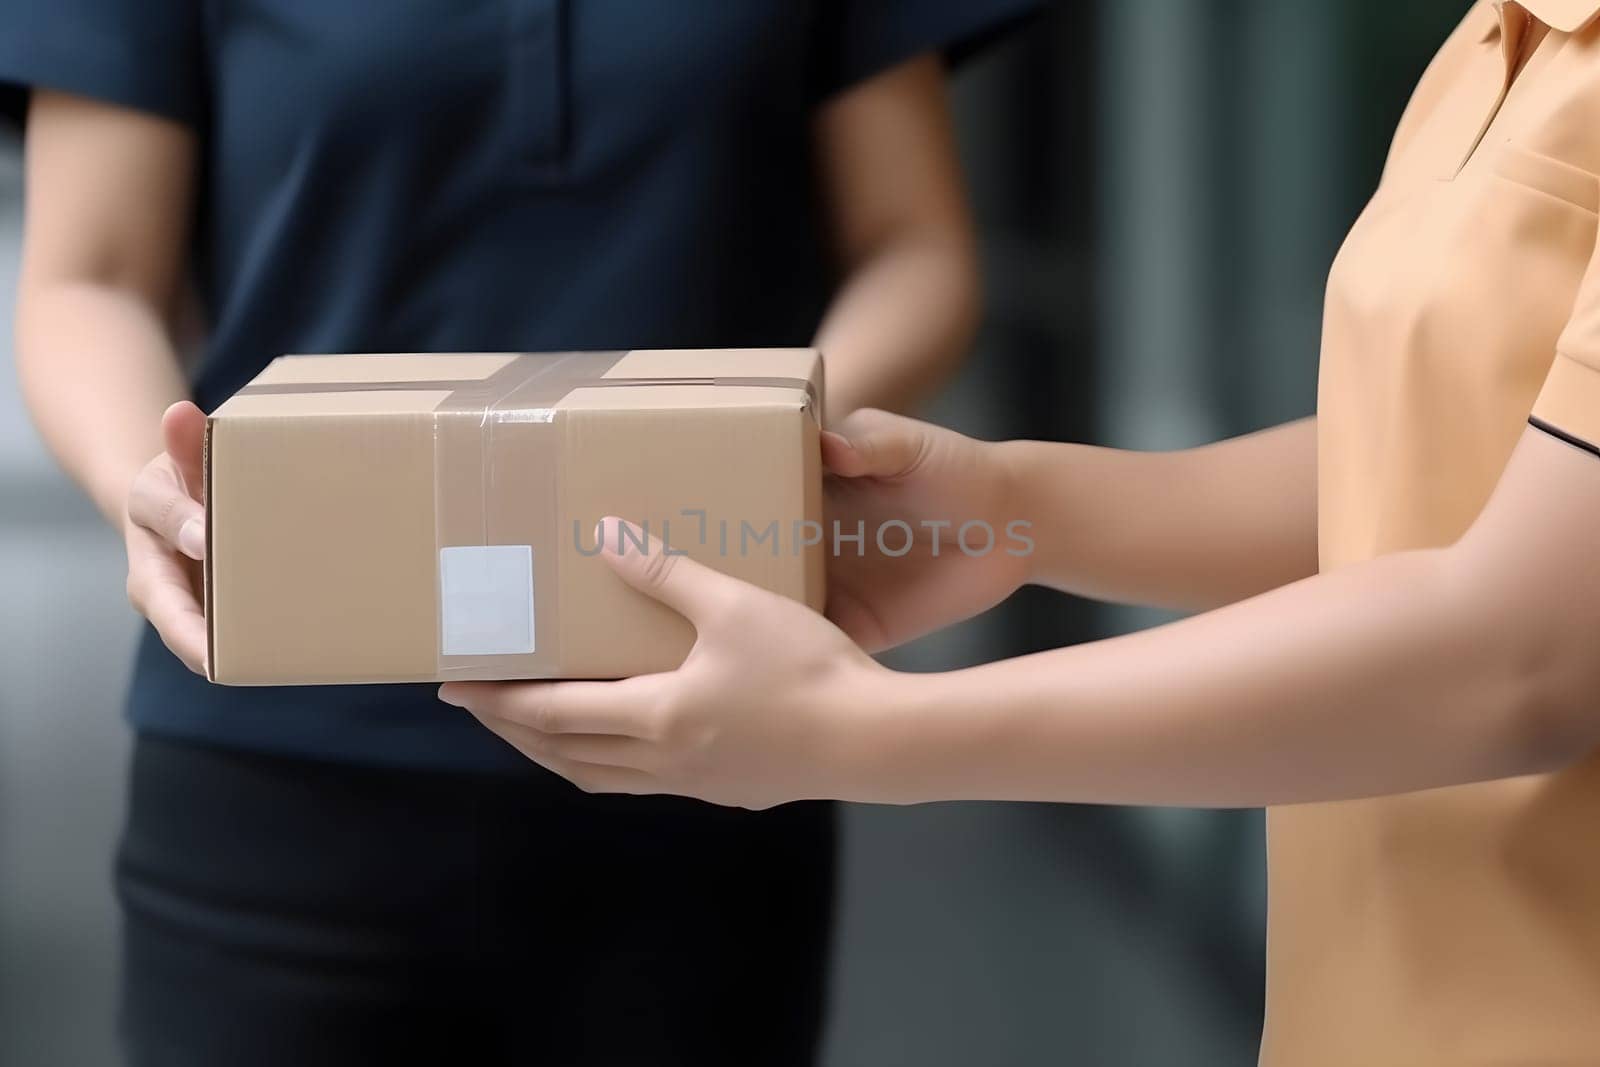 caucasian hands accepting a delivery of boxes, neural network generated photorealistic image by z1b